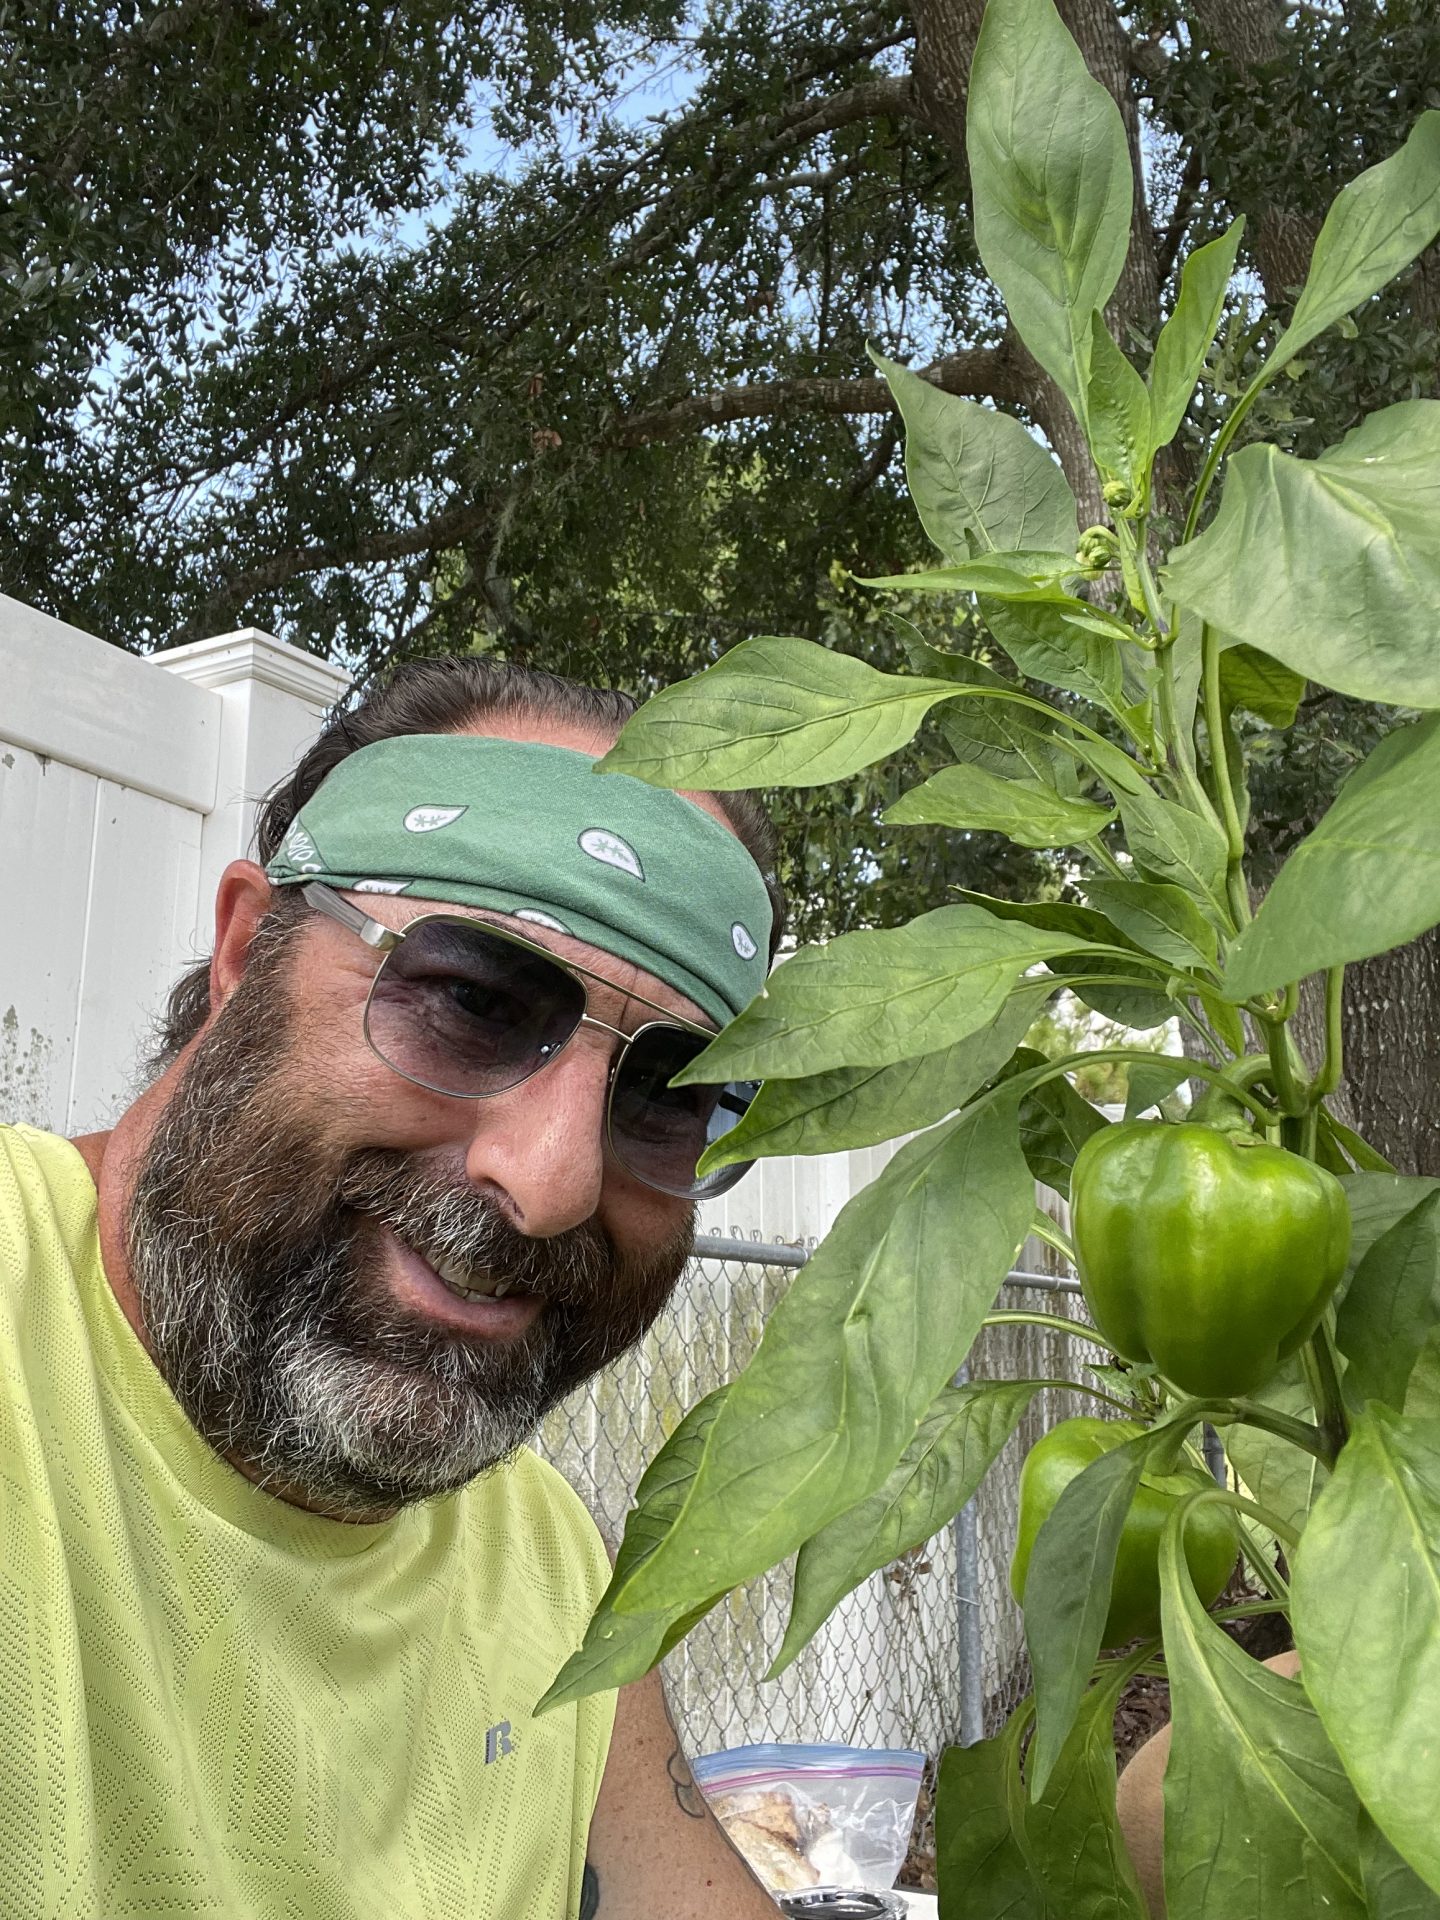 Eddie look at the pepper plant from Edmund’s grow box.  Remember how yours used to get so tall.  He & Cindy took over growing peppers & veggies.  Love you Eddie miss you soooo much❤️❤️